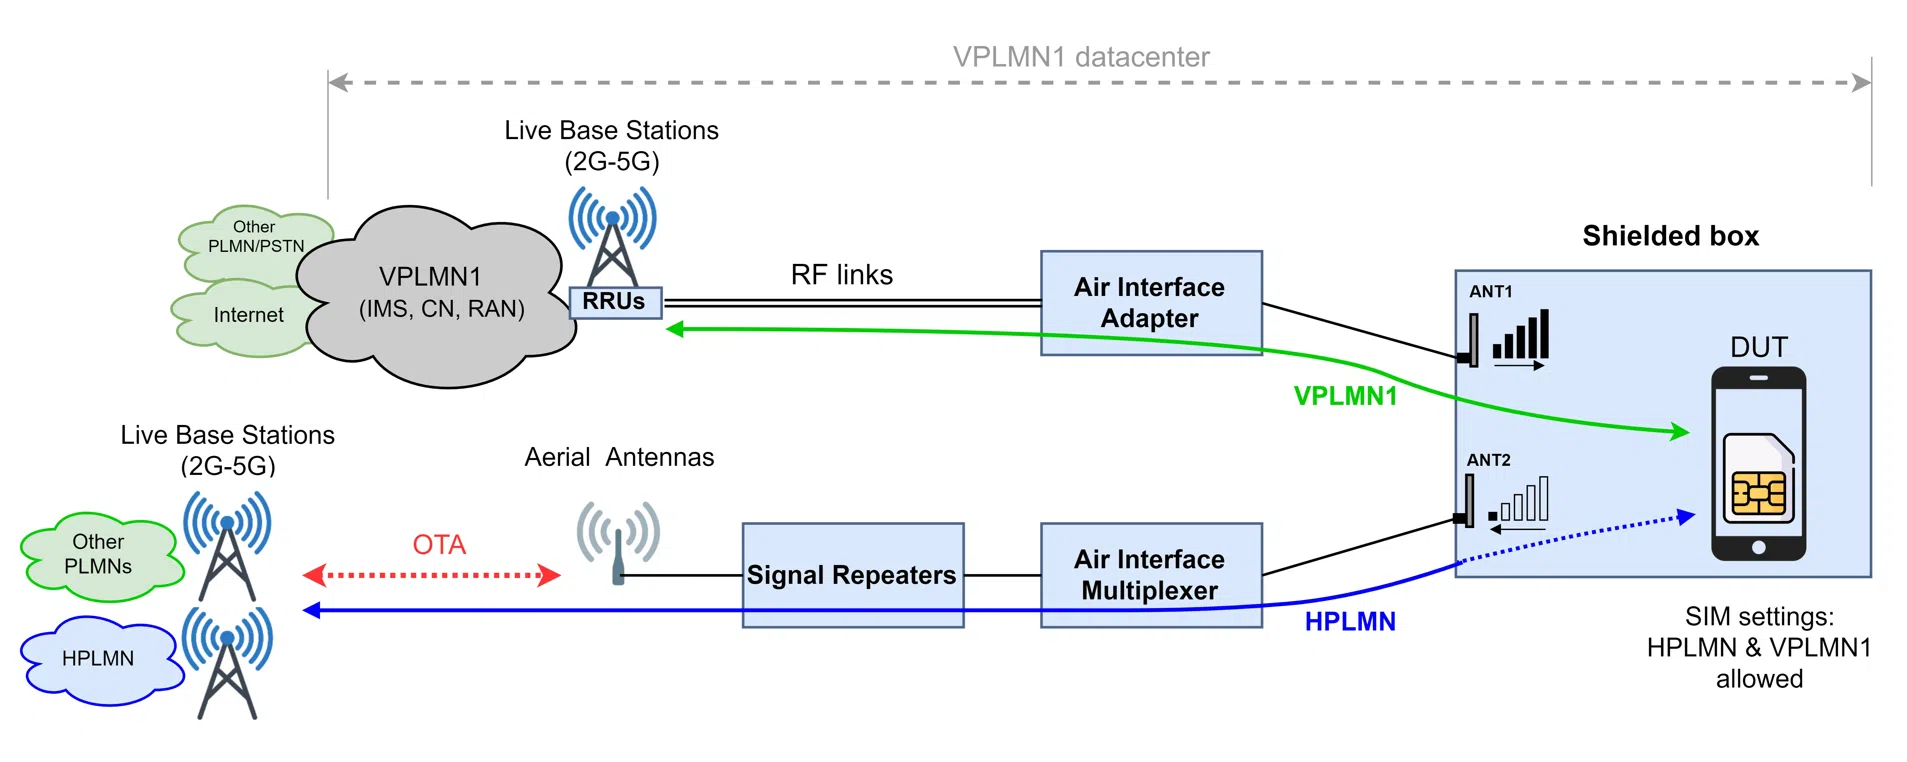 Simulation of live network conditions where a device moves outside of its home network (HPLMN) and must connect through a visited network's infrastructure (VPLMN). The MS makes a periodic search for the HPLMN while national roaming.